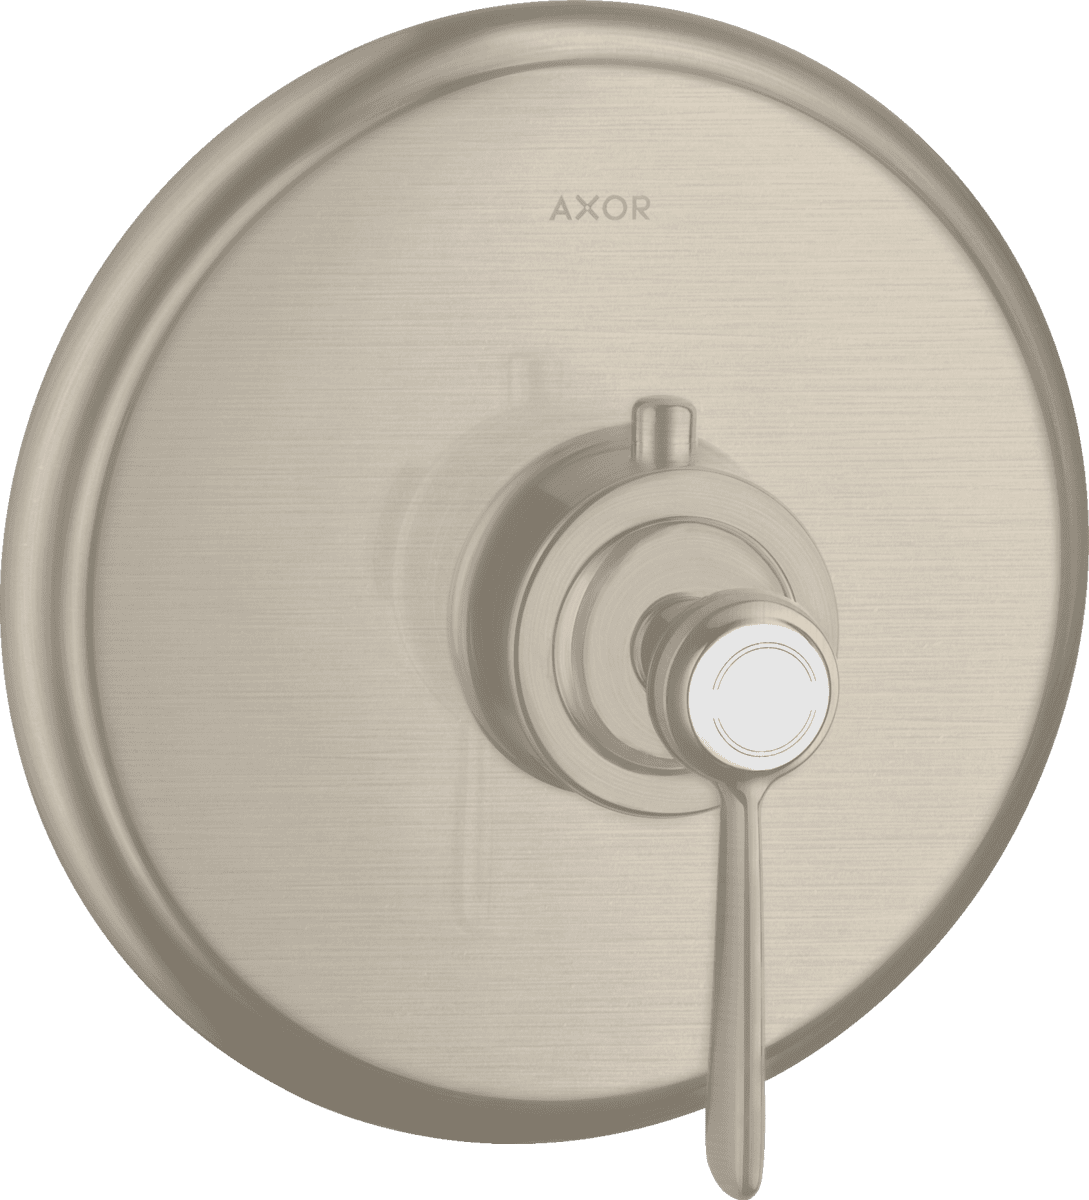 Picture of HANSGROHE AXOR Montreux Thermostat HighFlow for concealed installation with lever handle #16824820 - Brushed Nickel